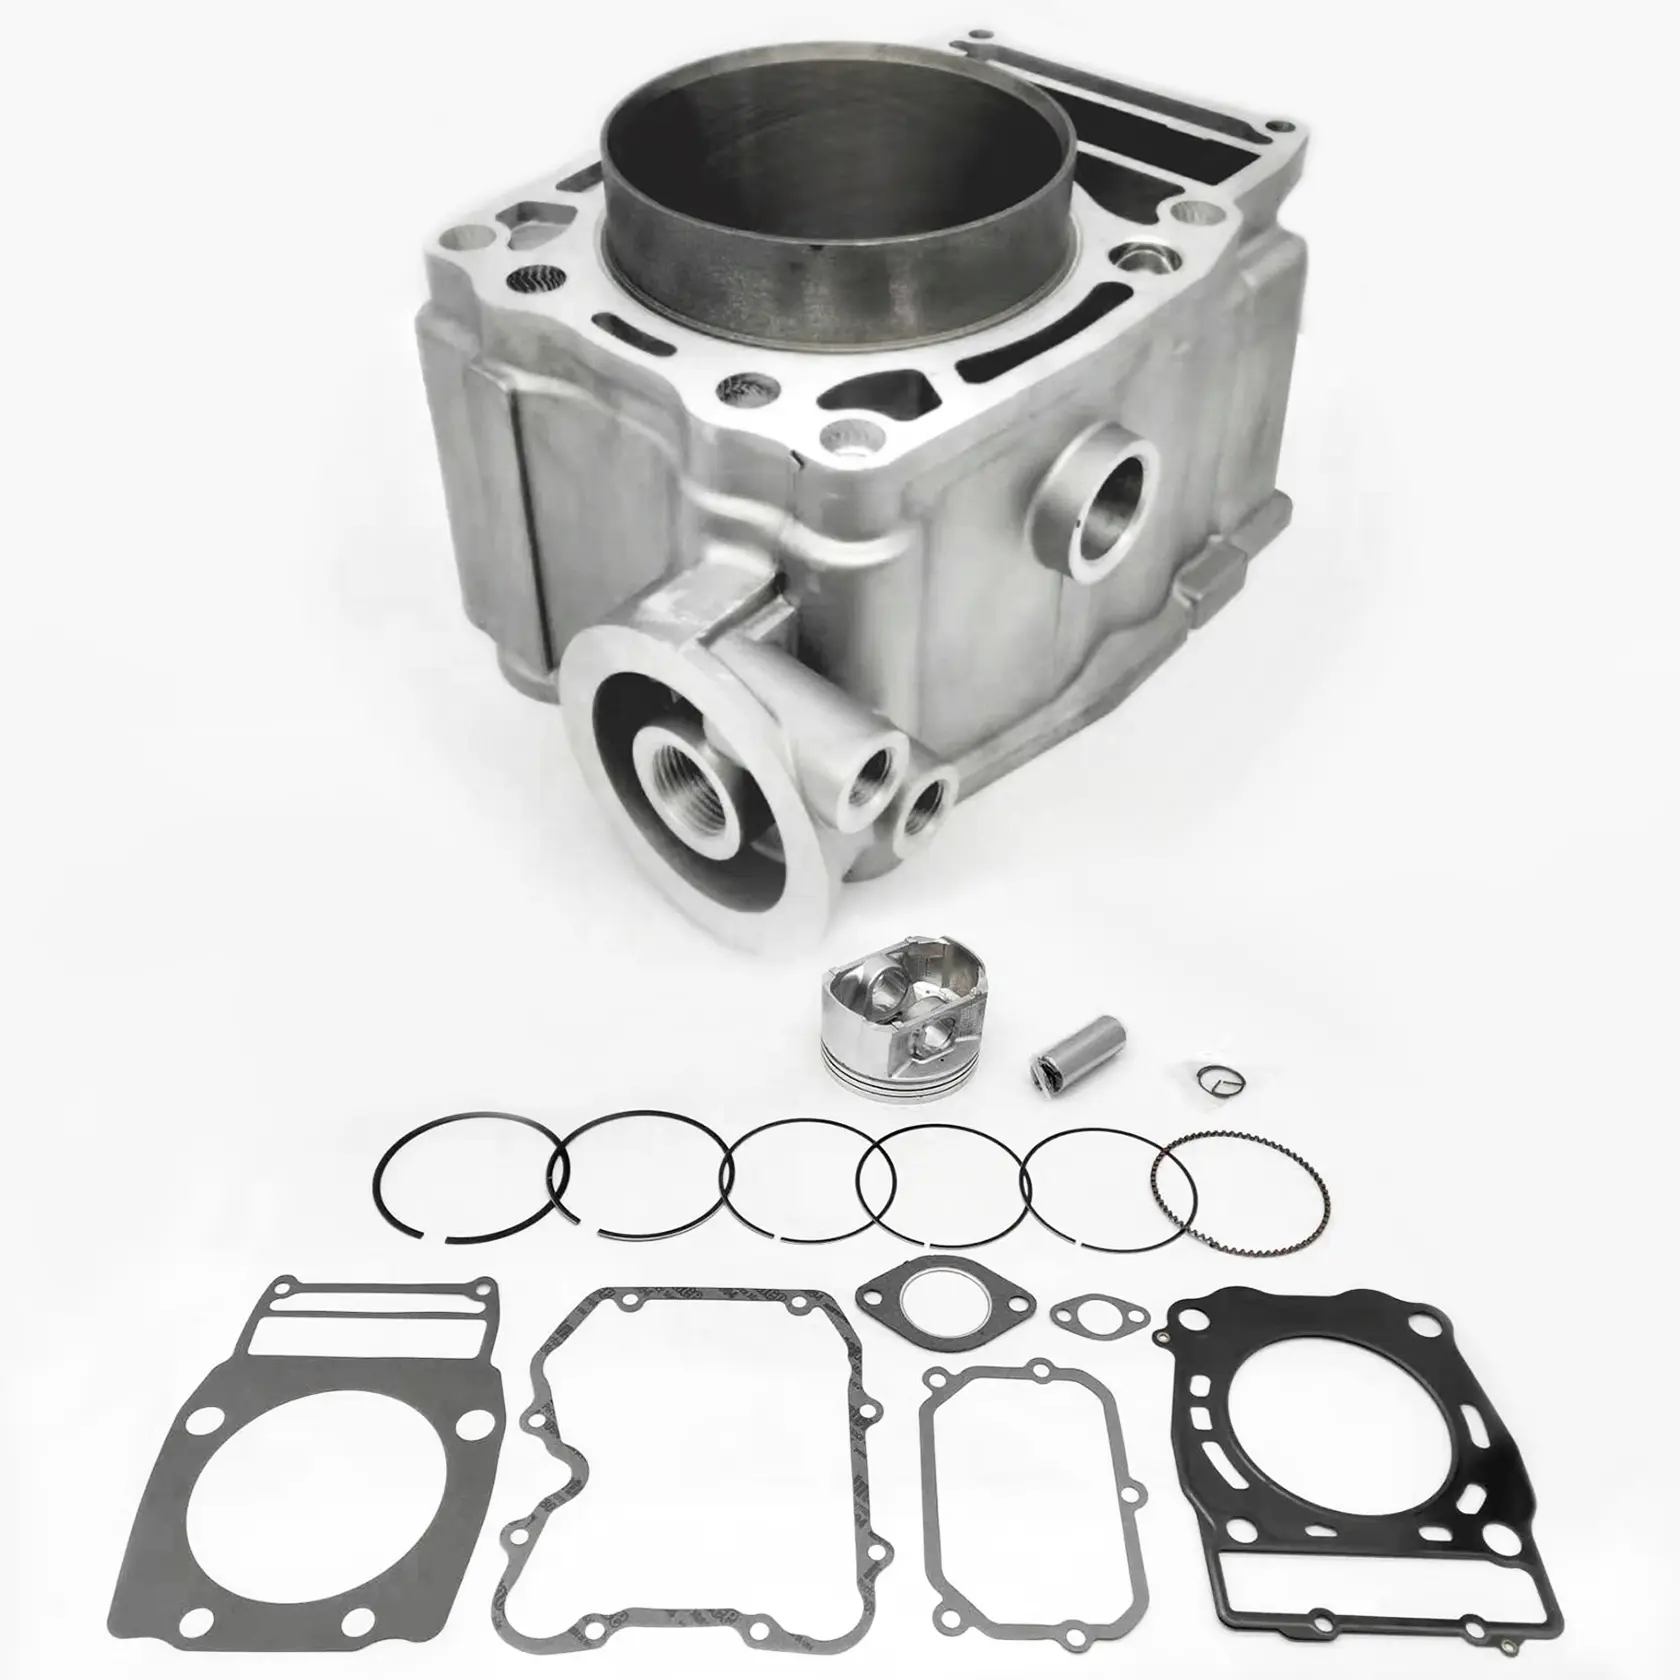 NP High Performance Aftermarket Motorcycle Parts Accessories Cylinder Kit pour Polaris Sportsman 500